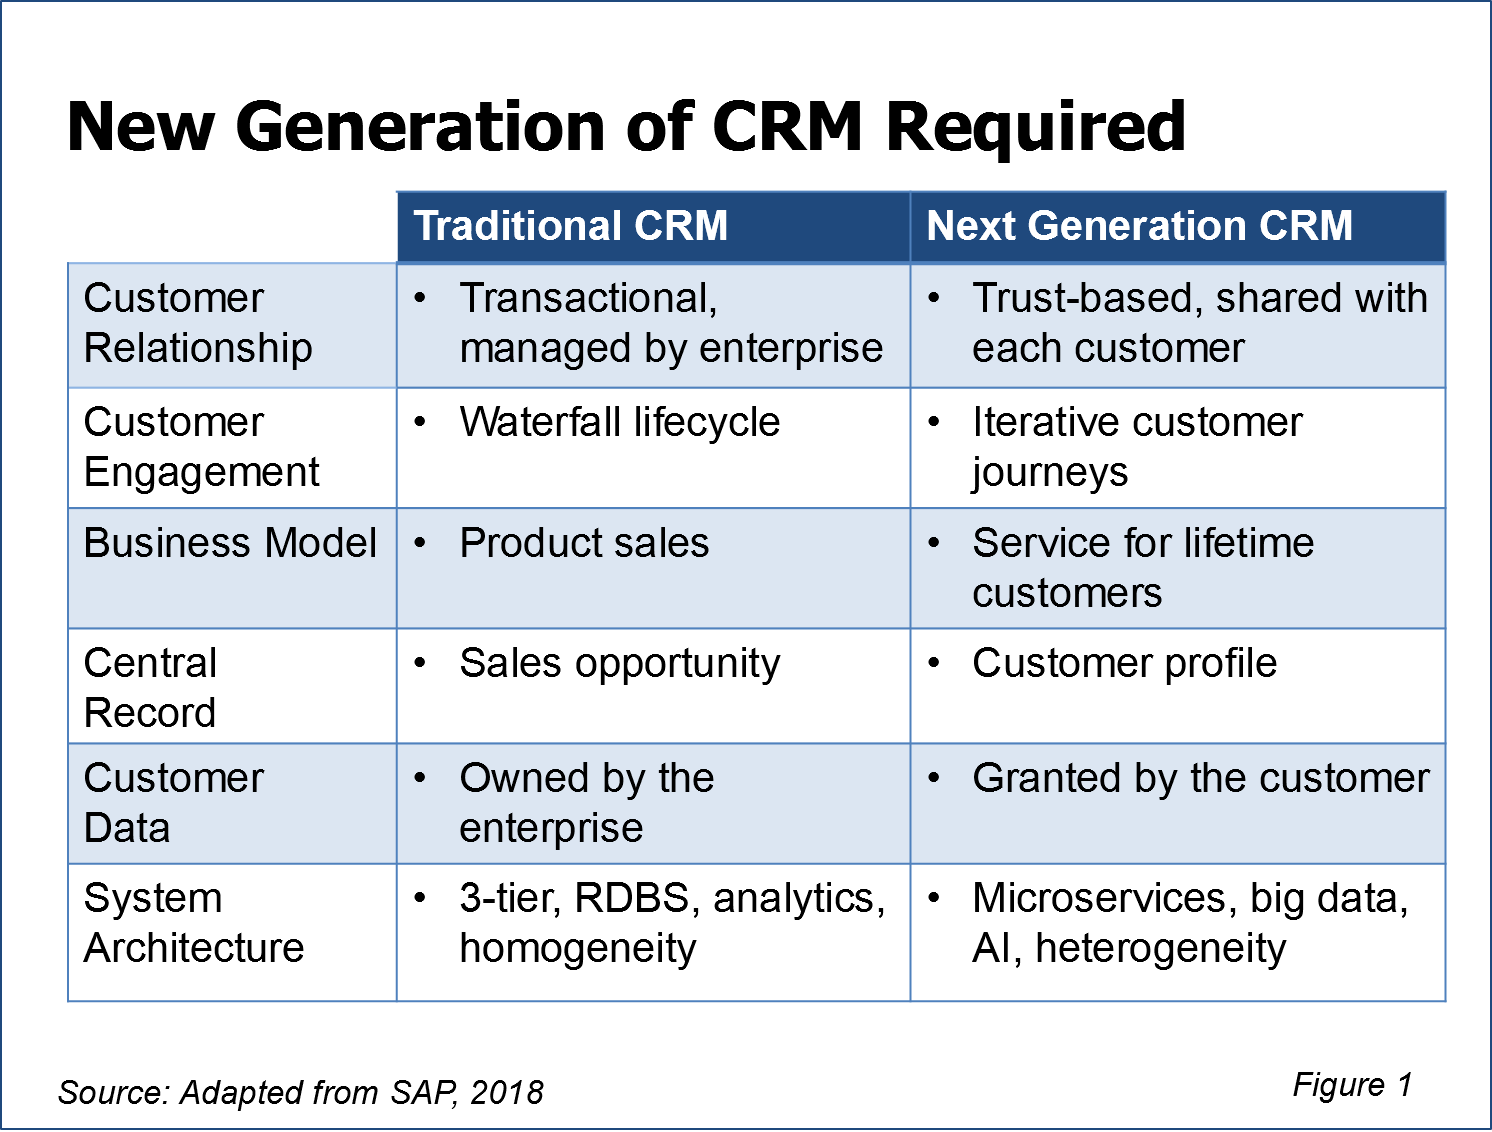 NexGenCRMFig1 - Next-Generation CRM: Who Gets There First?